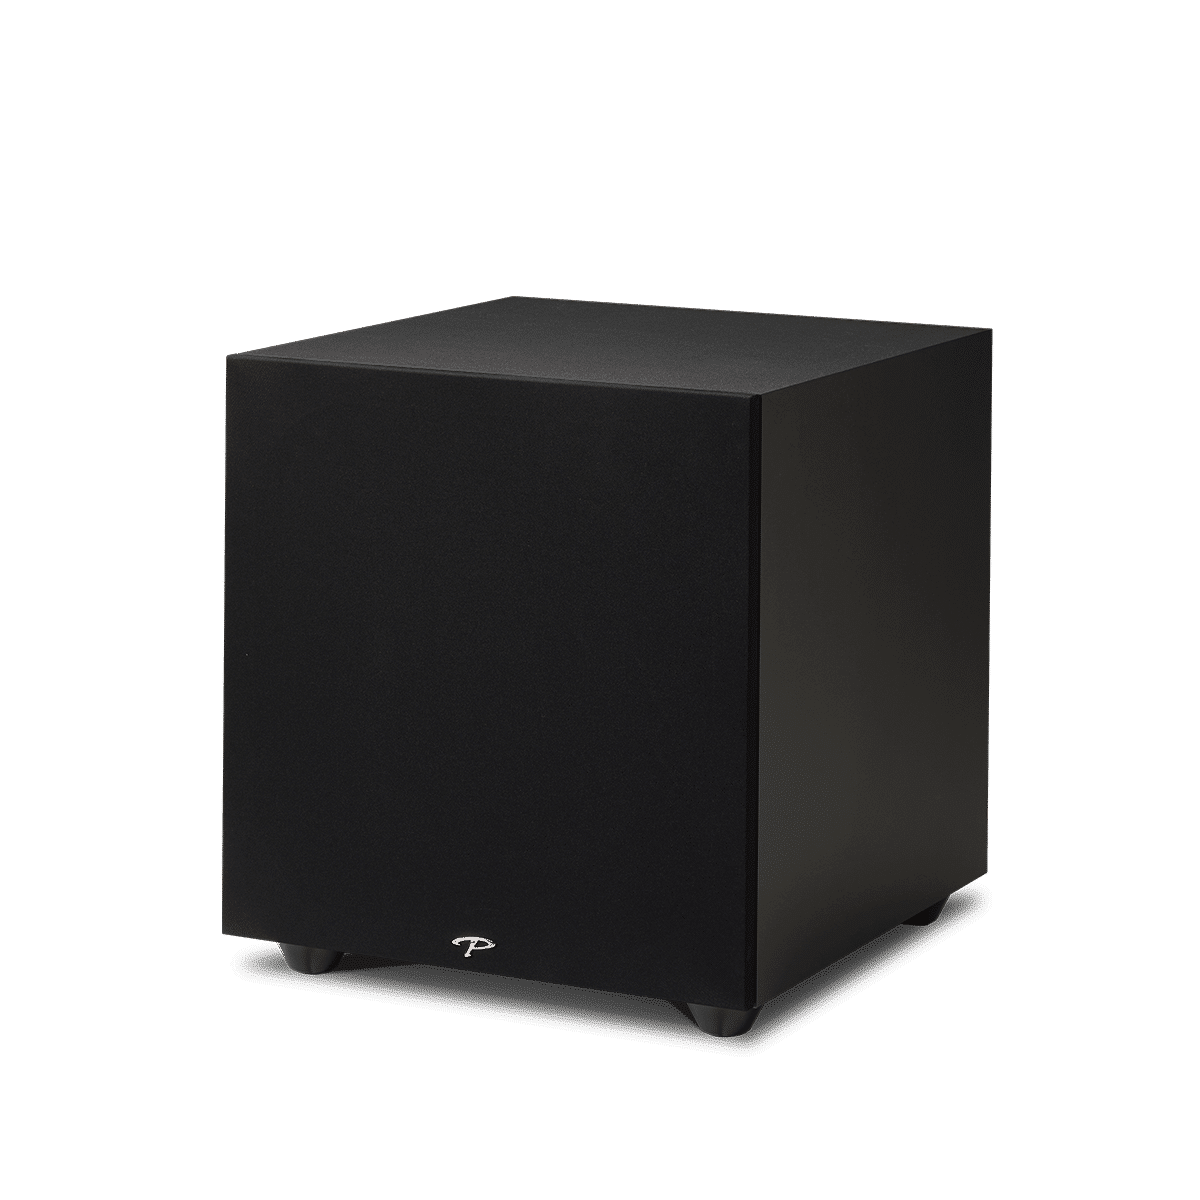 Paradigm Defiance X12 Subwoofer front angled view with grill